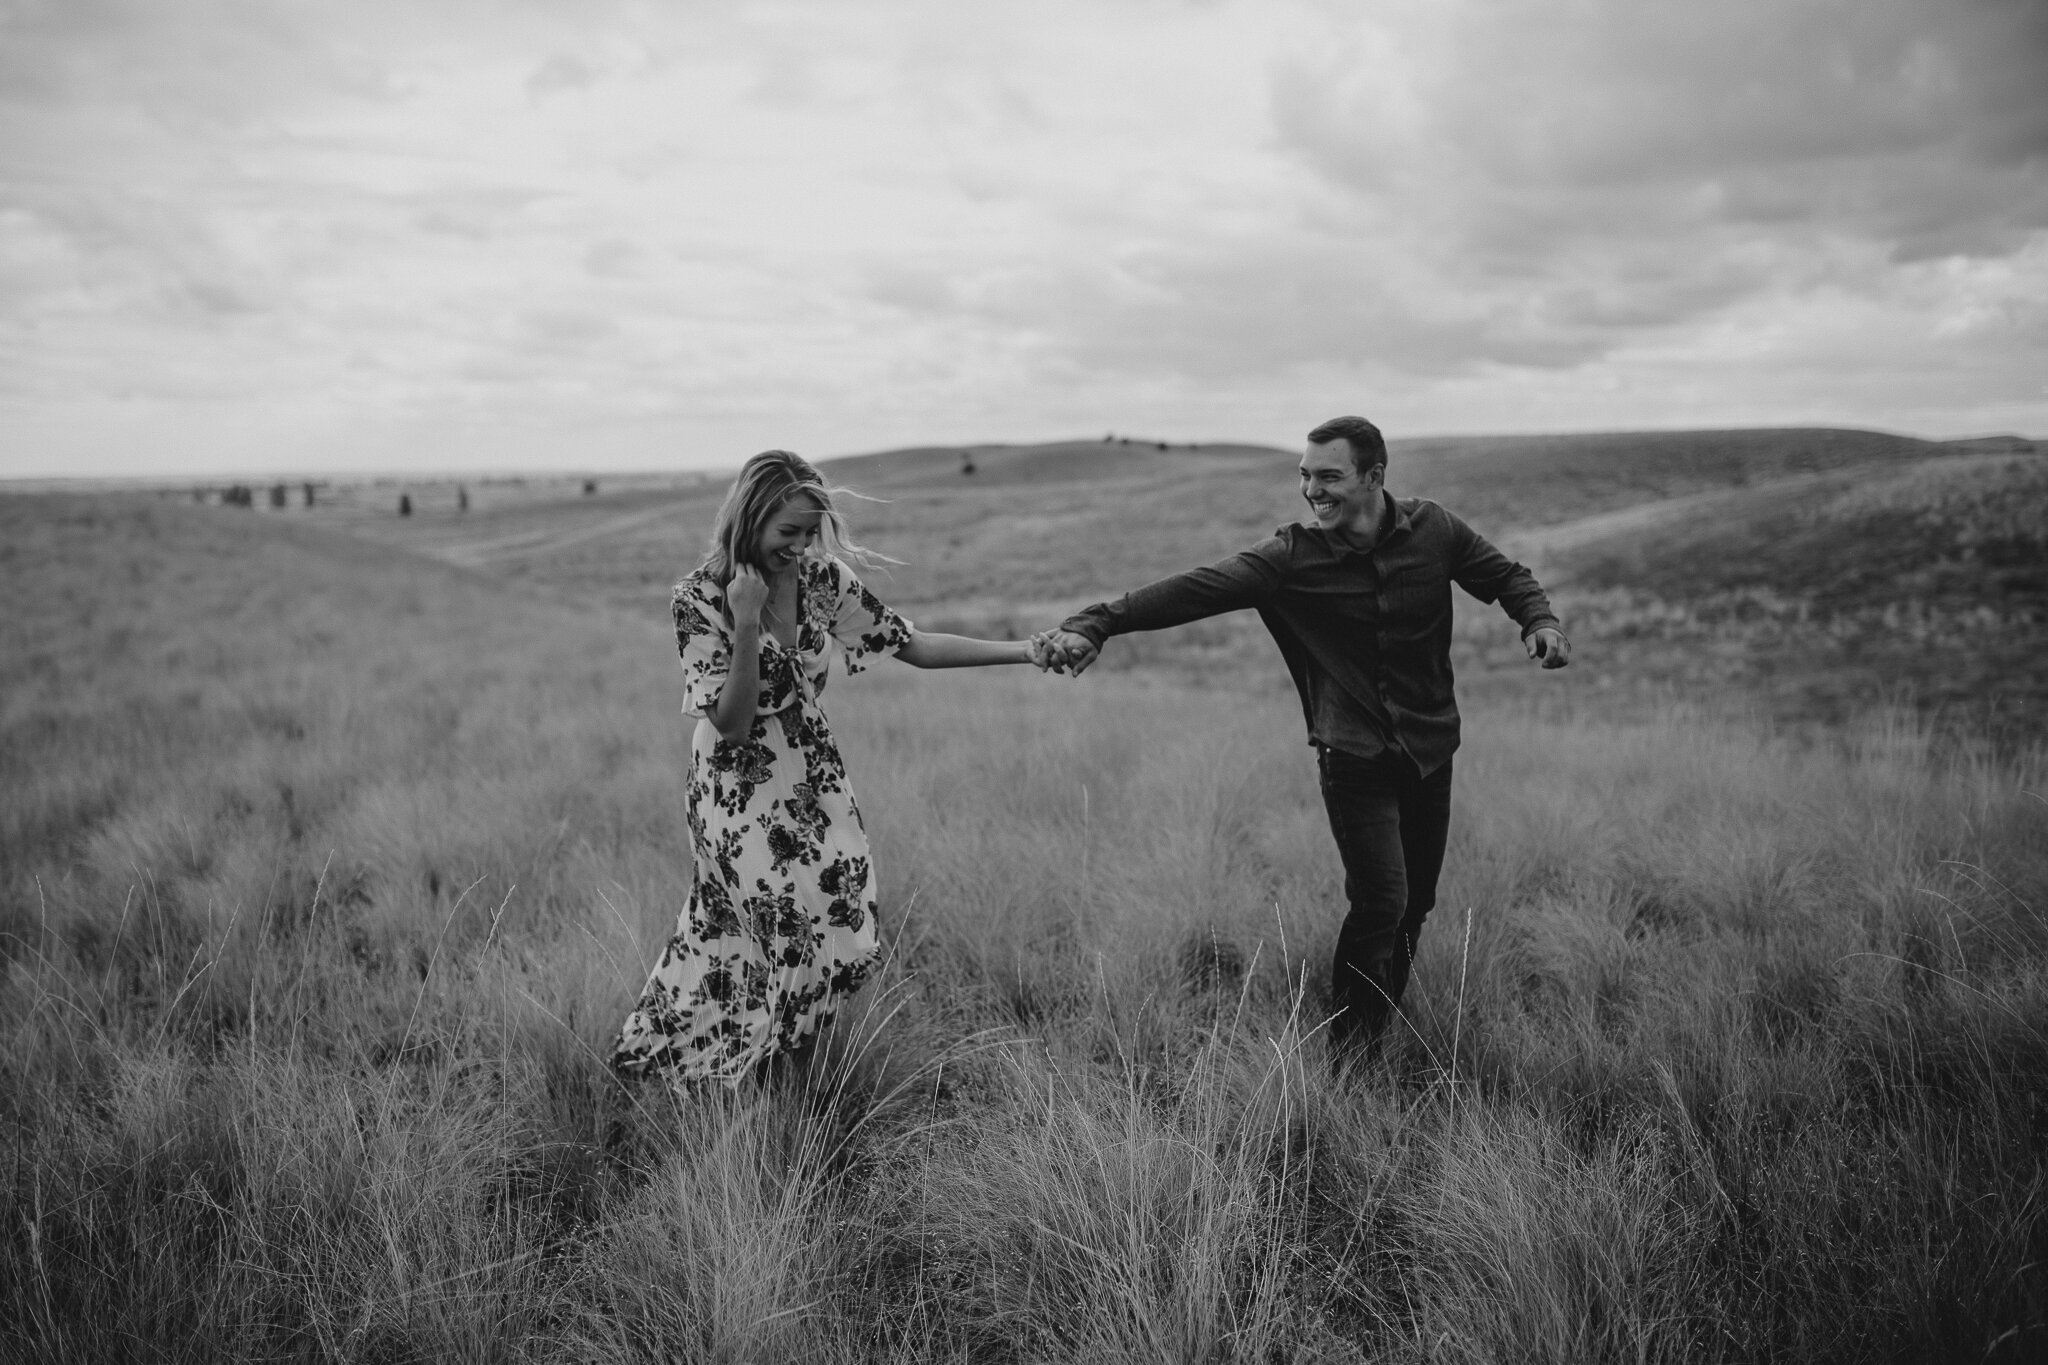  black and white image of couple holding hands in field 